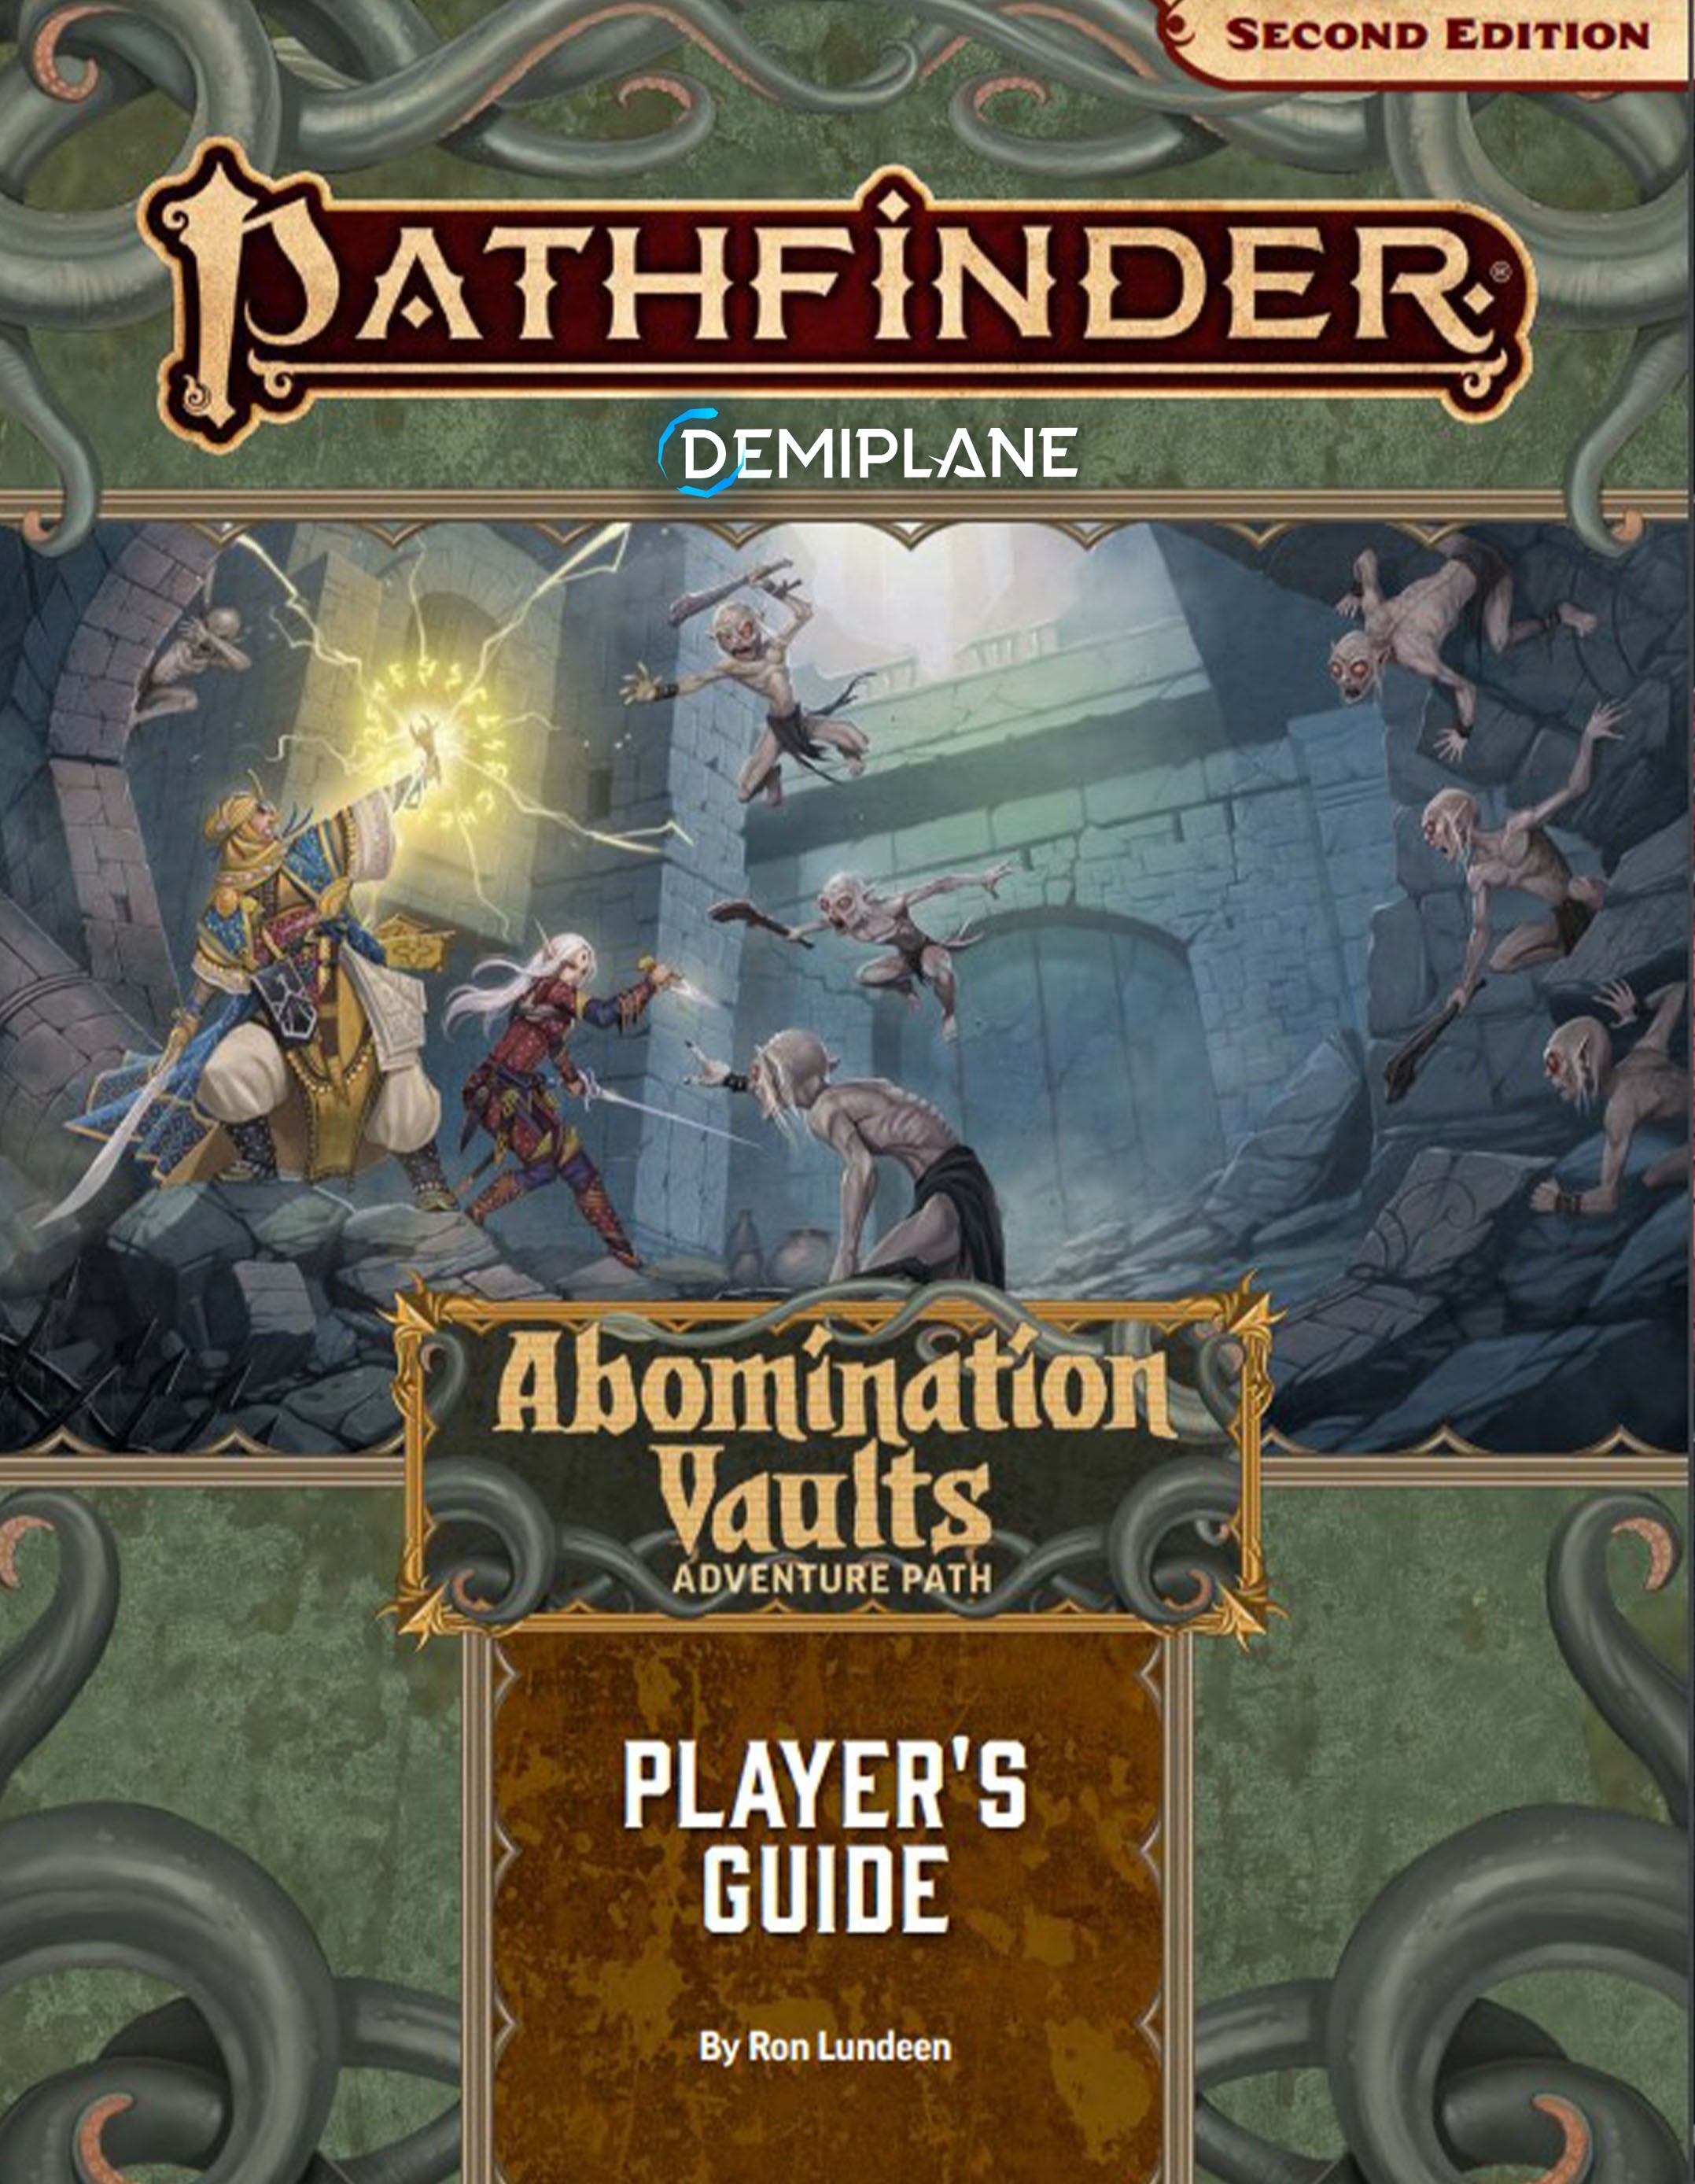 Abomination Vaults: Player's Guide